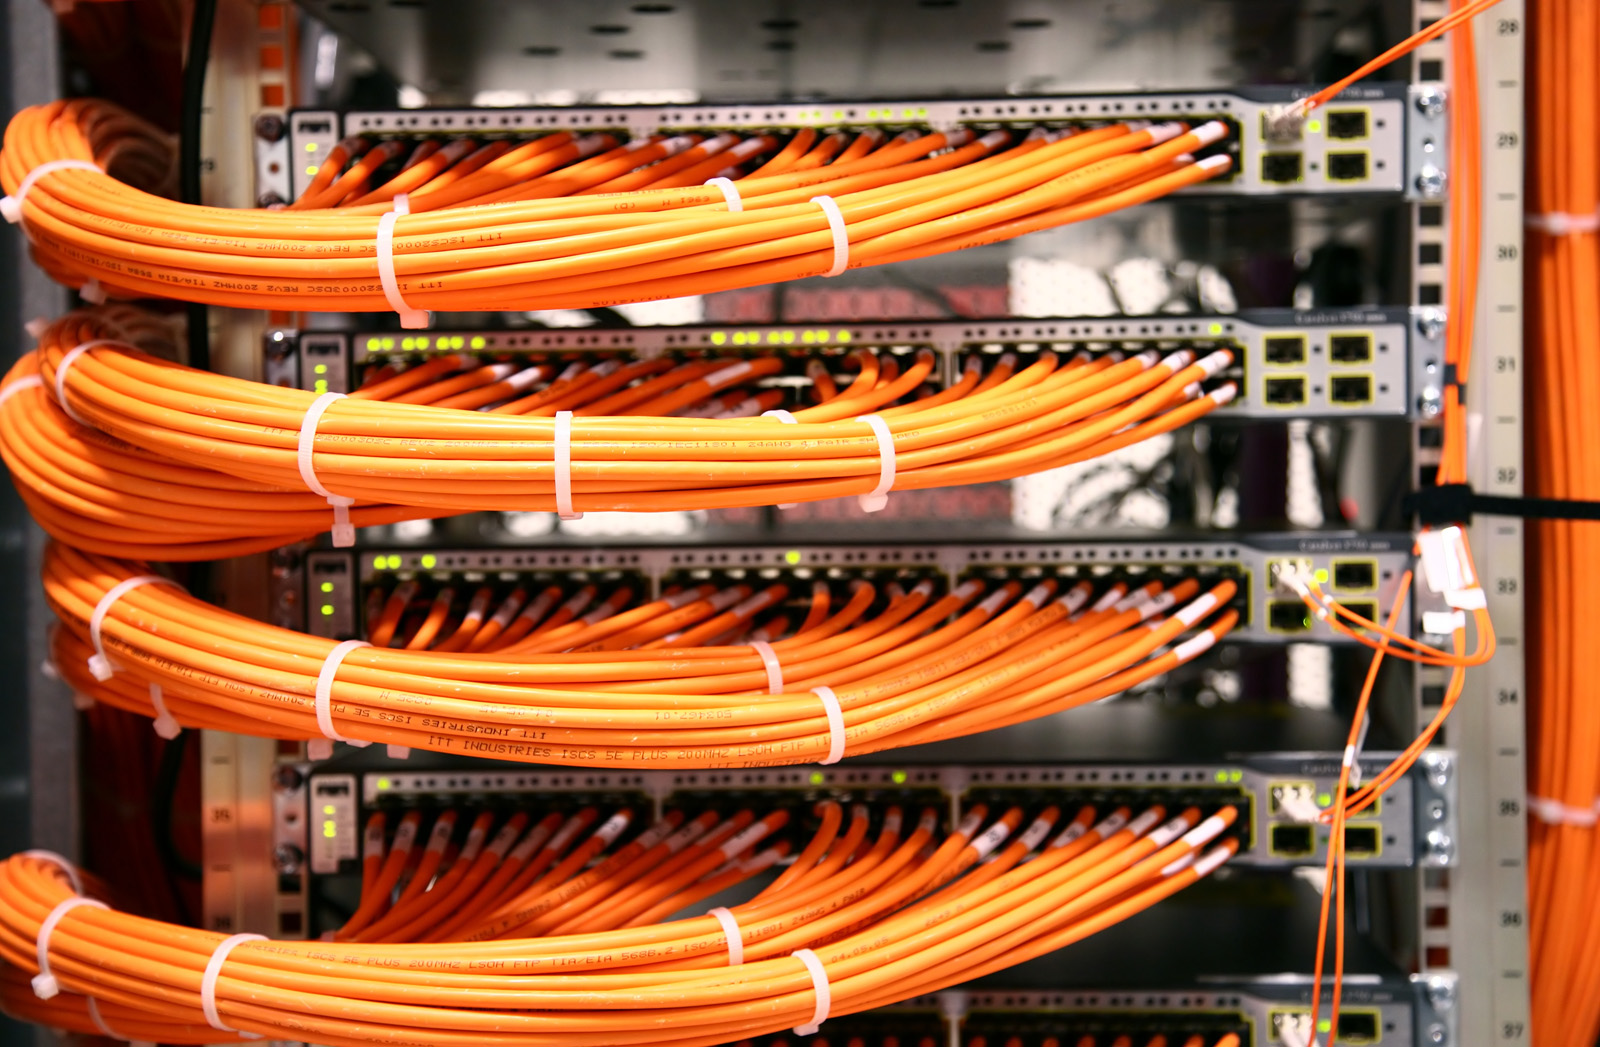 Albany Kentucky Premier Voice & Data Network Cabling Services